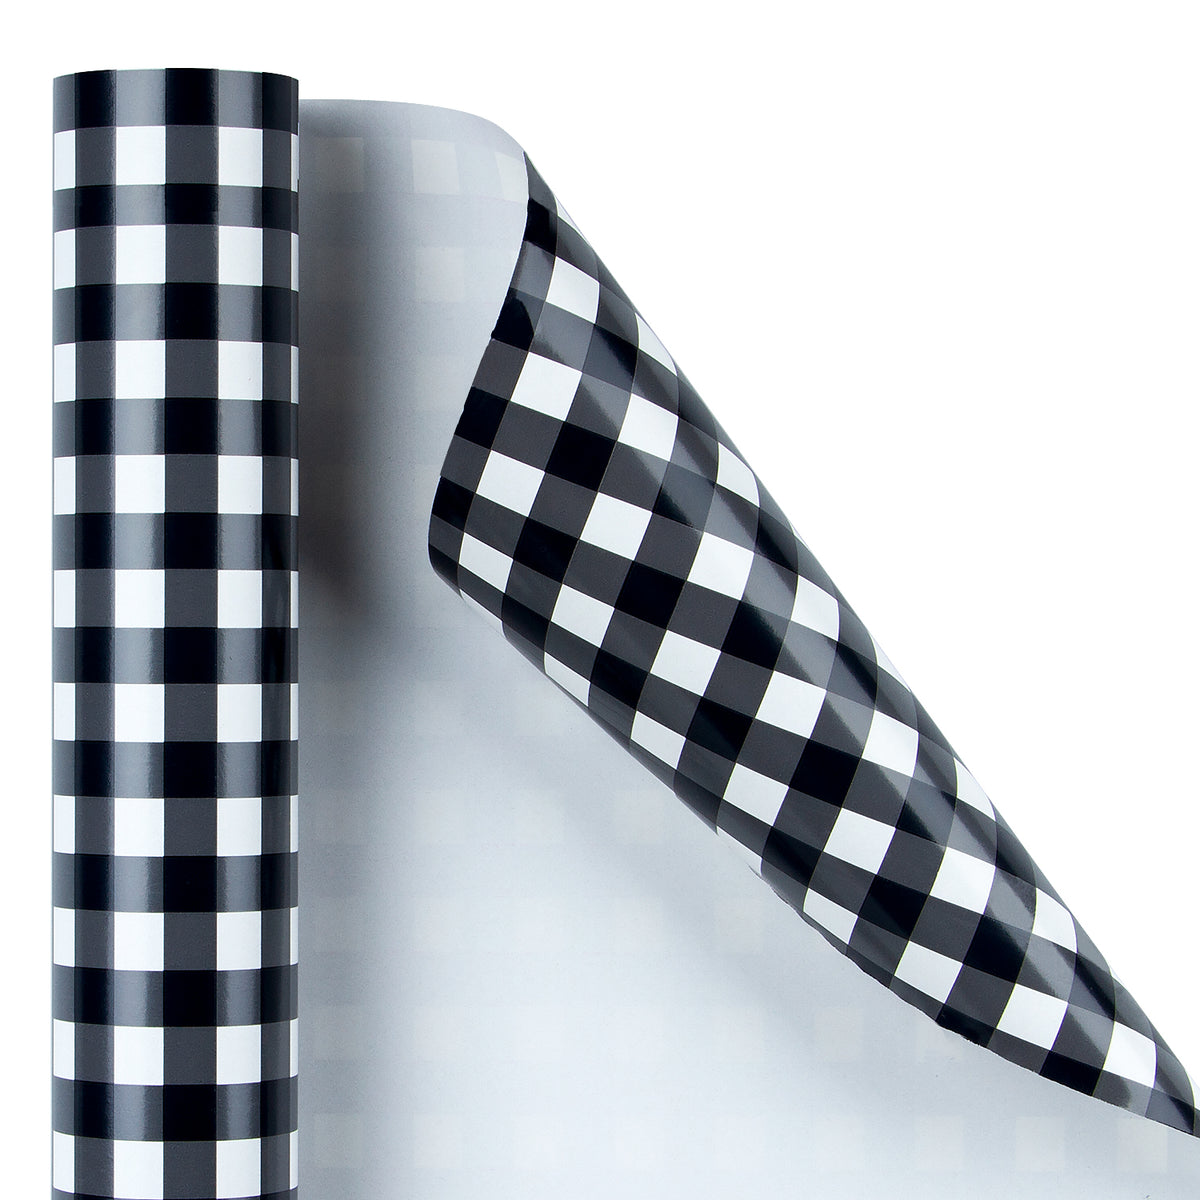  Black and White Tissue Paper for Gift Wrapping, Checkered  Pattern, 24 Sheets, Large 20x30 : Health & Household